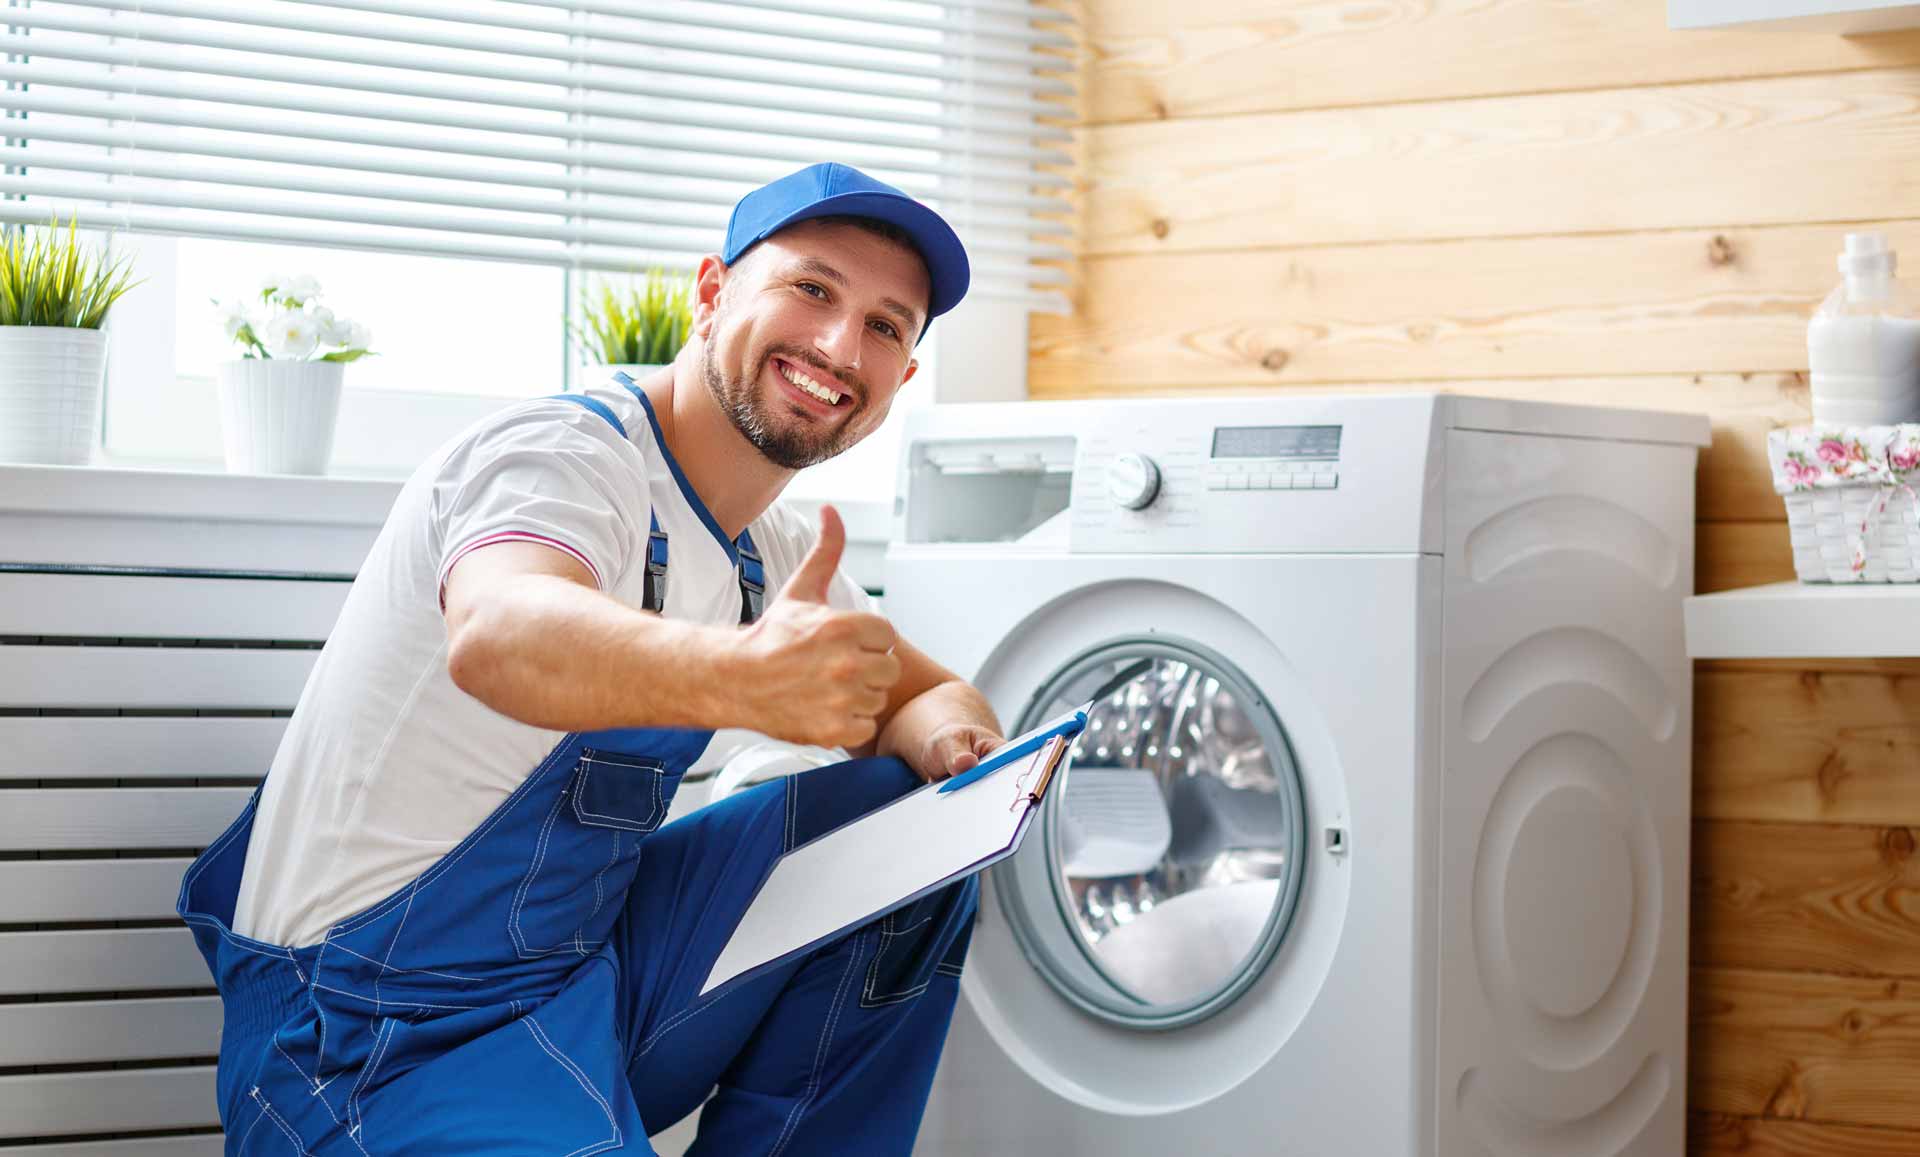 Appliance repair technician posing with a washer/dryer. He is smiling and giving the camera a "thumbs up" gesture